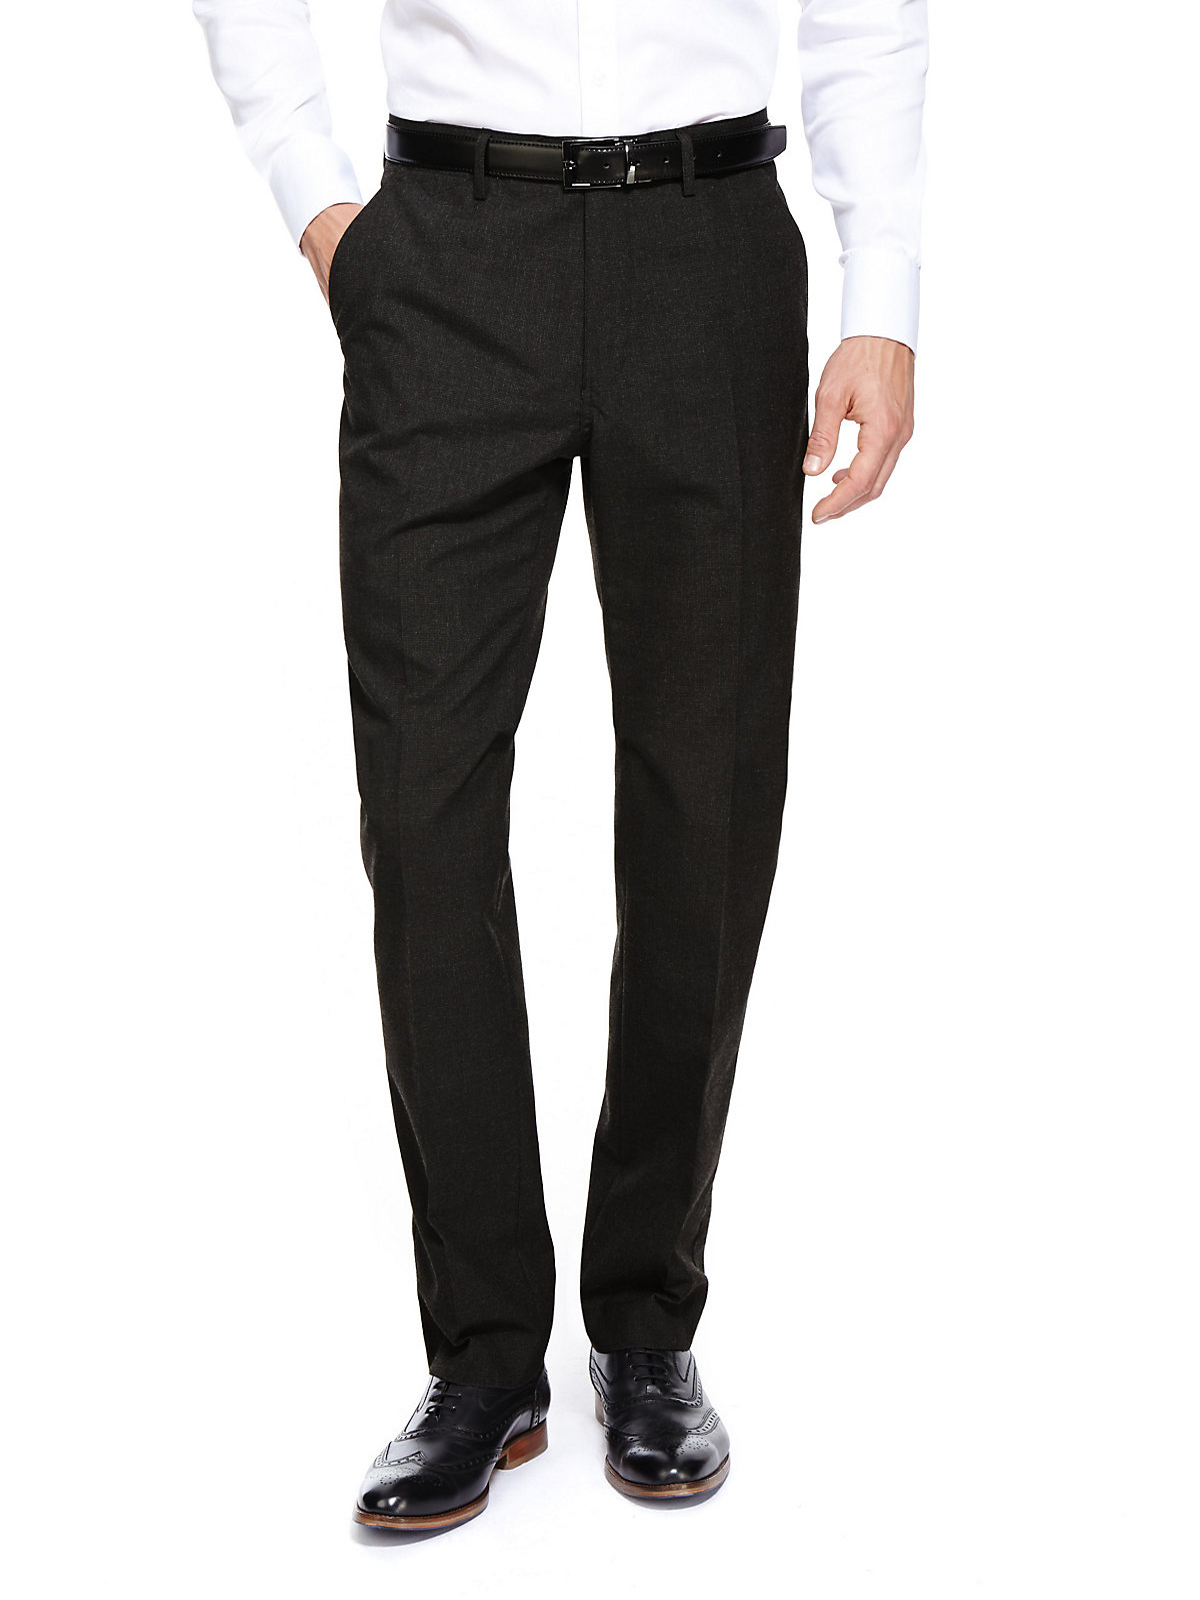 Marks and Spencer - - M&5 DARK-GREY Slim Fit Flat Front Trousers ...